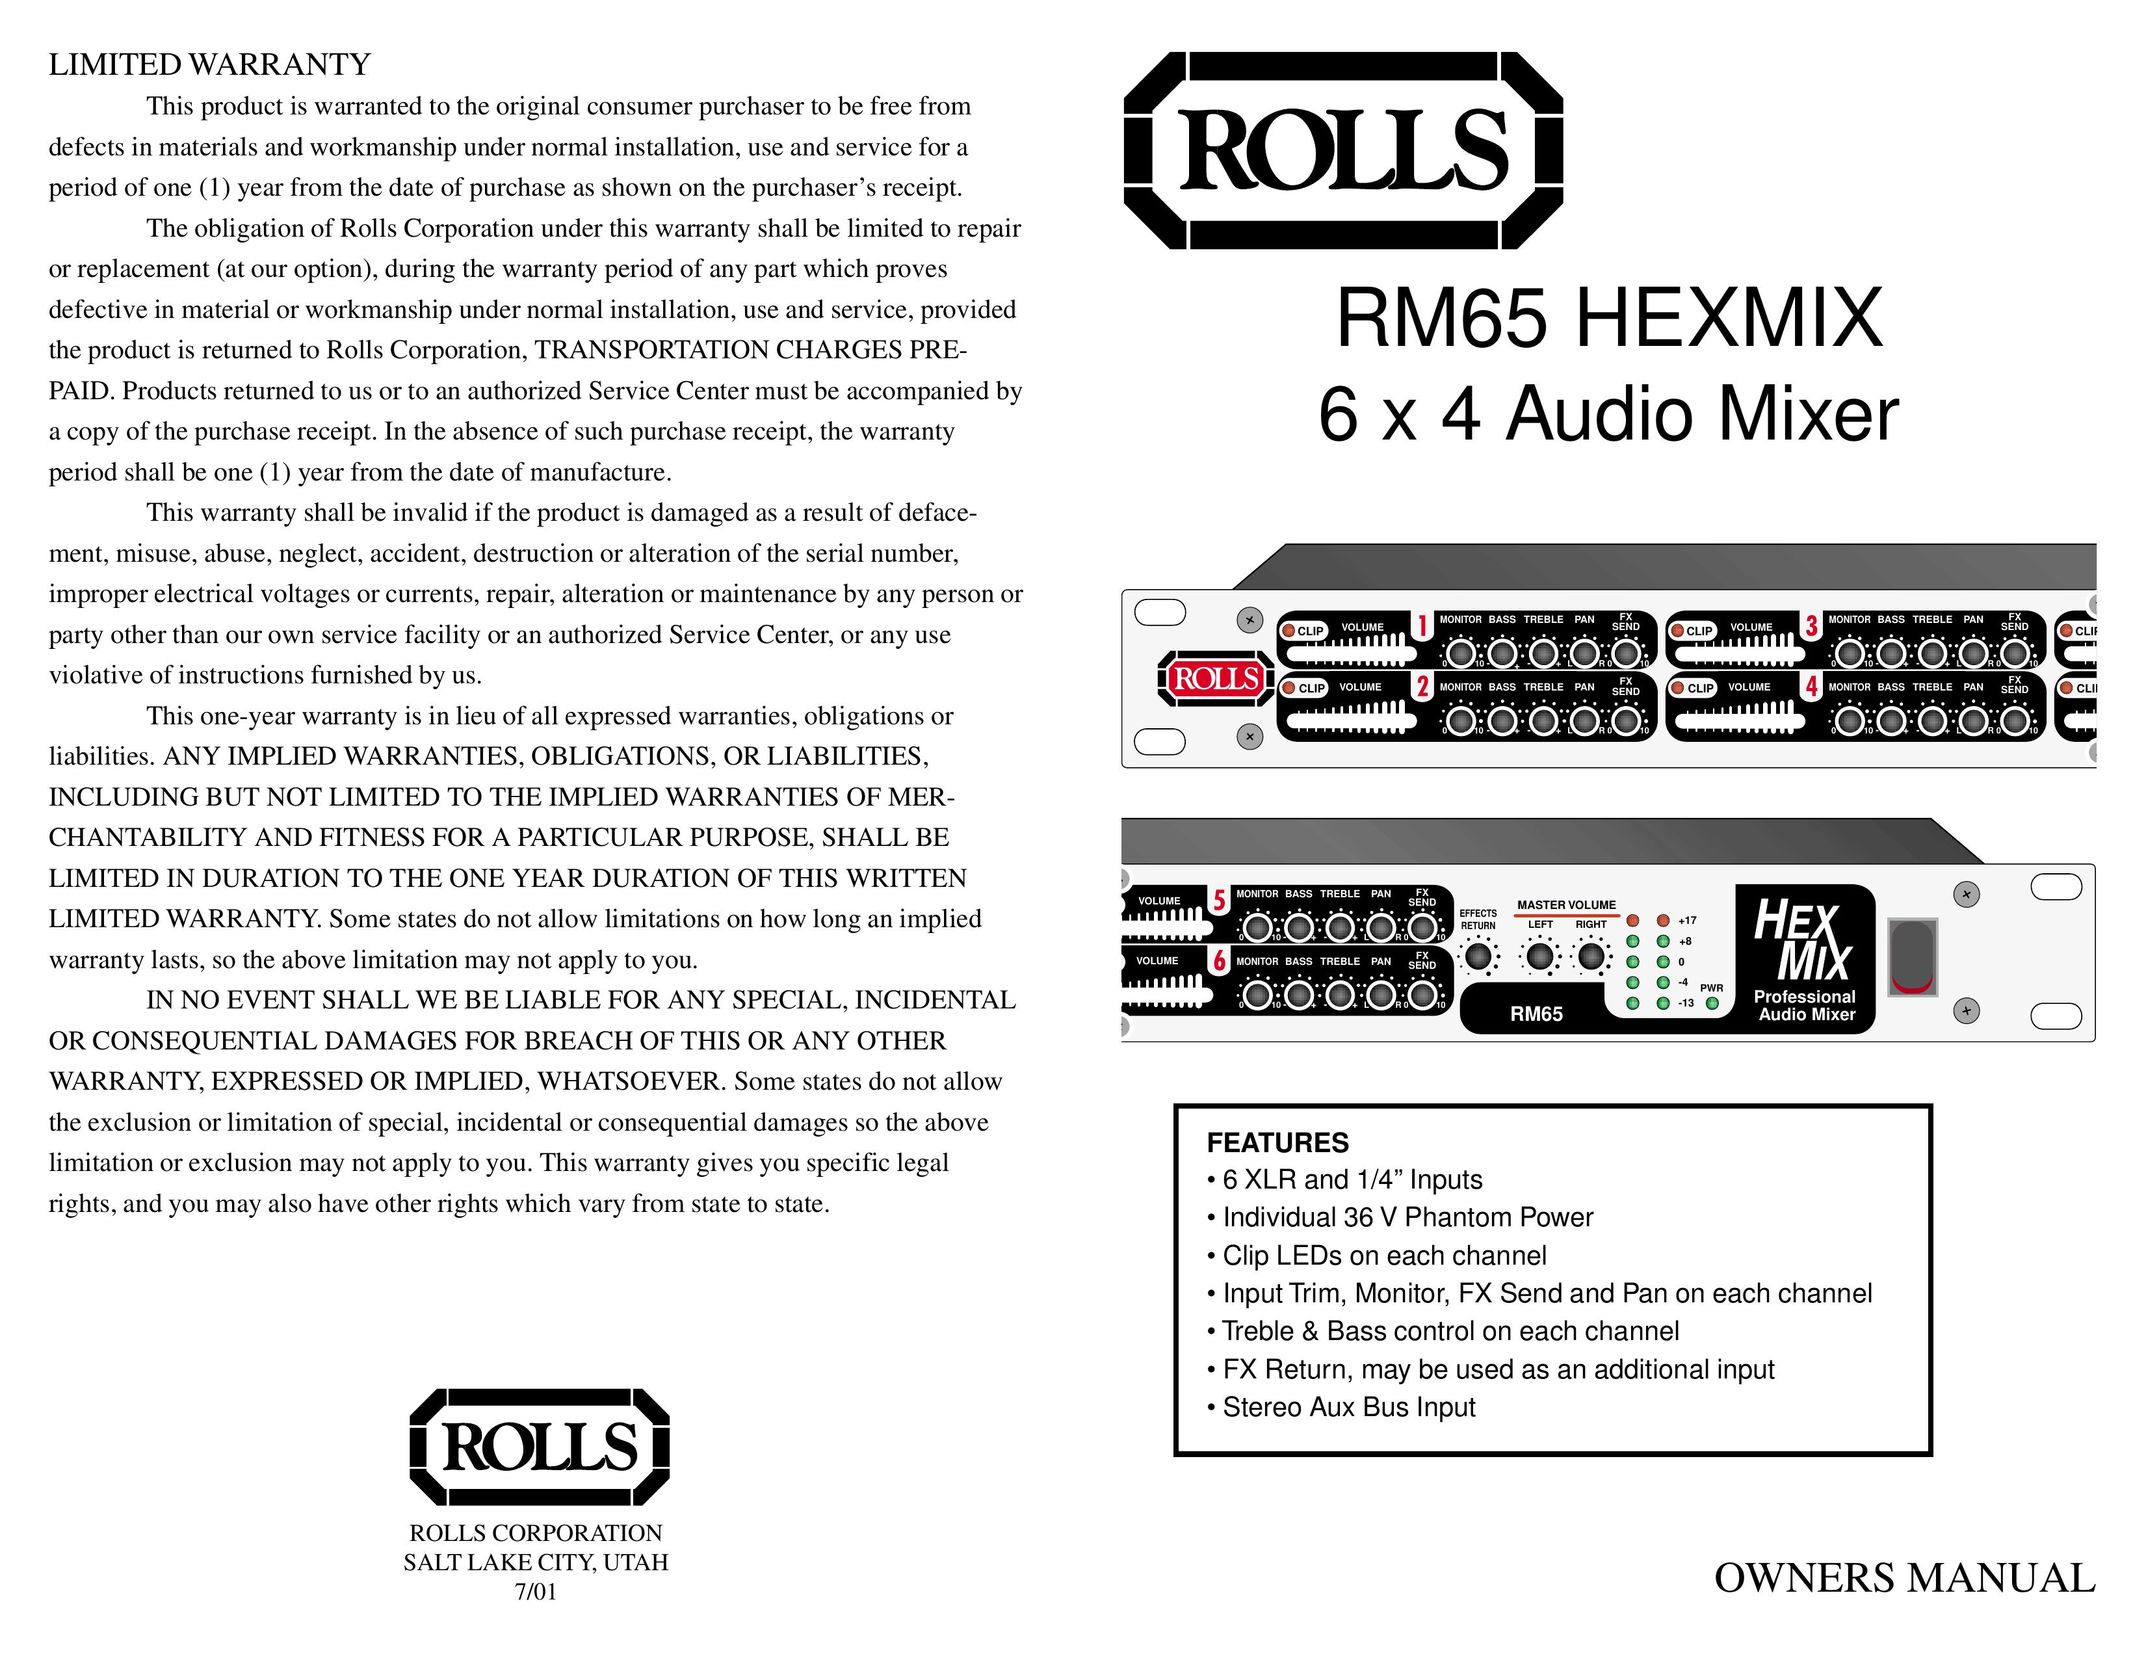 Rolls RM65 Home Theater Server User Manual